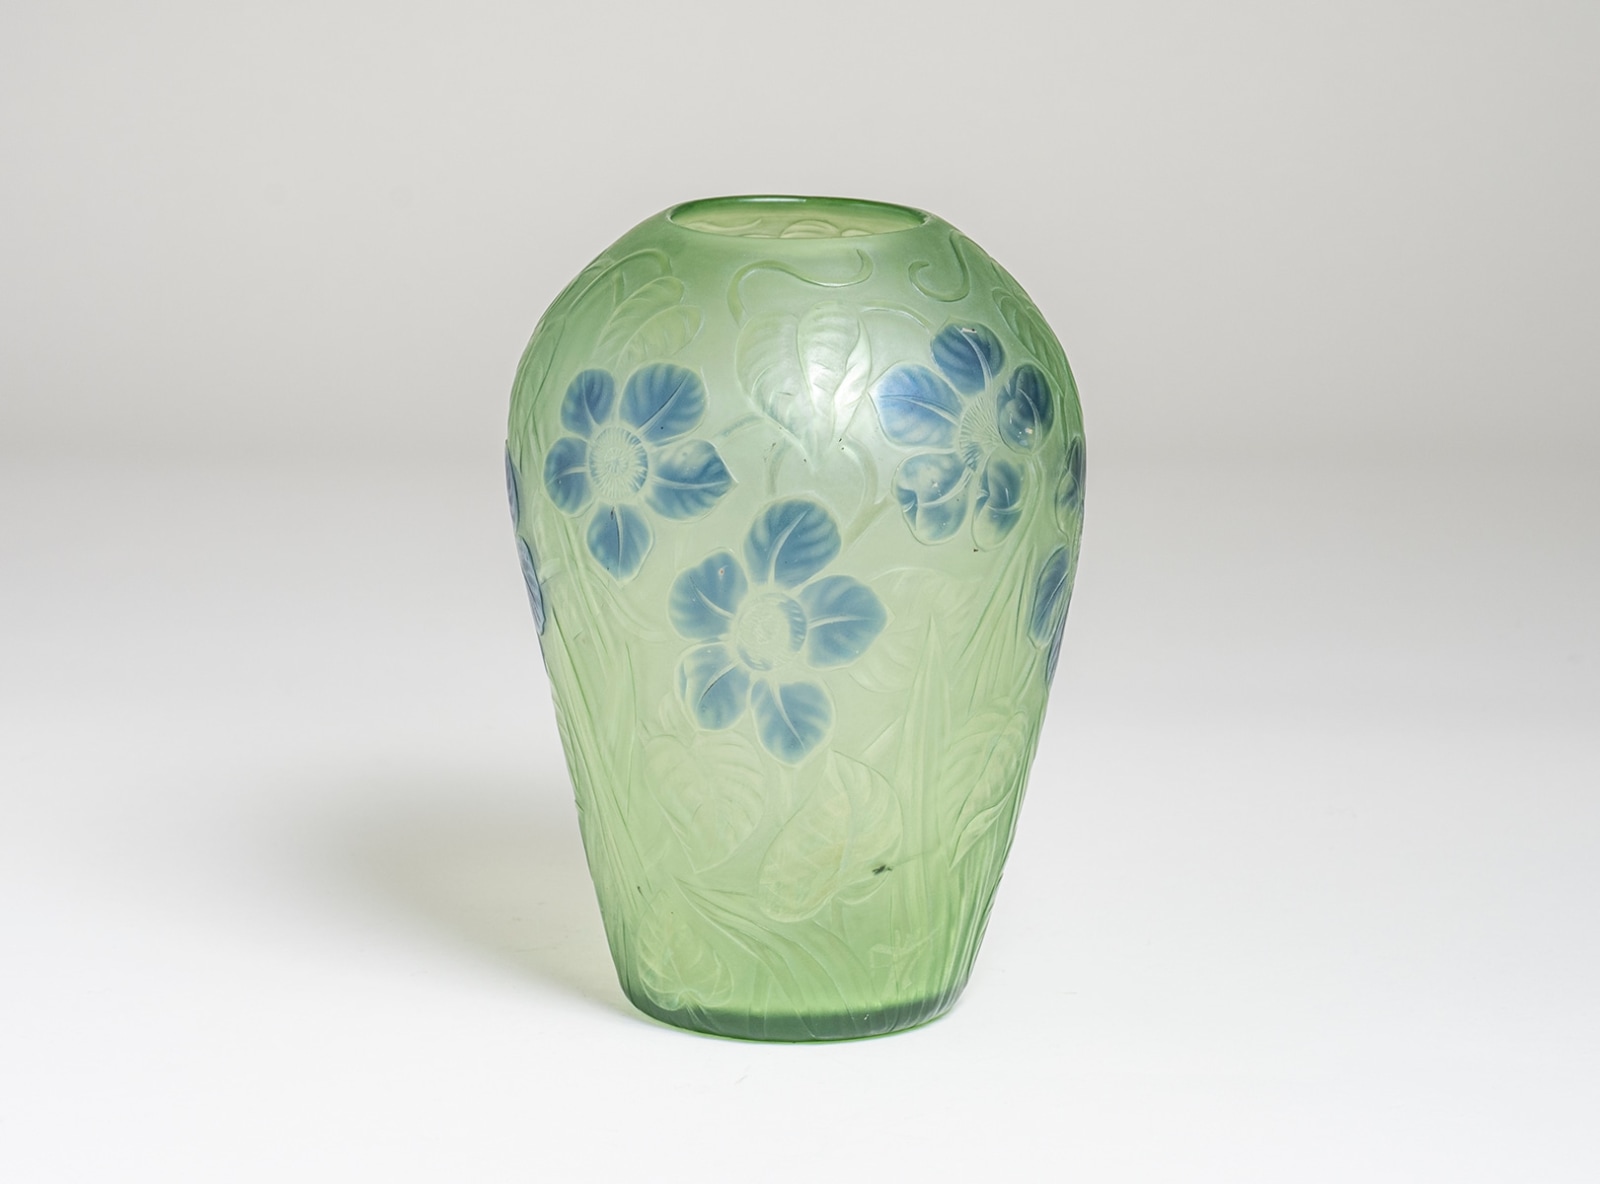 a cameo tiffany favrile glass vase, the green base glass with allover motif of pointed leaves and vines, interspersed near the rounded shoulder with blue five-petaled flowers. All in a soft muted tone.